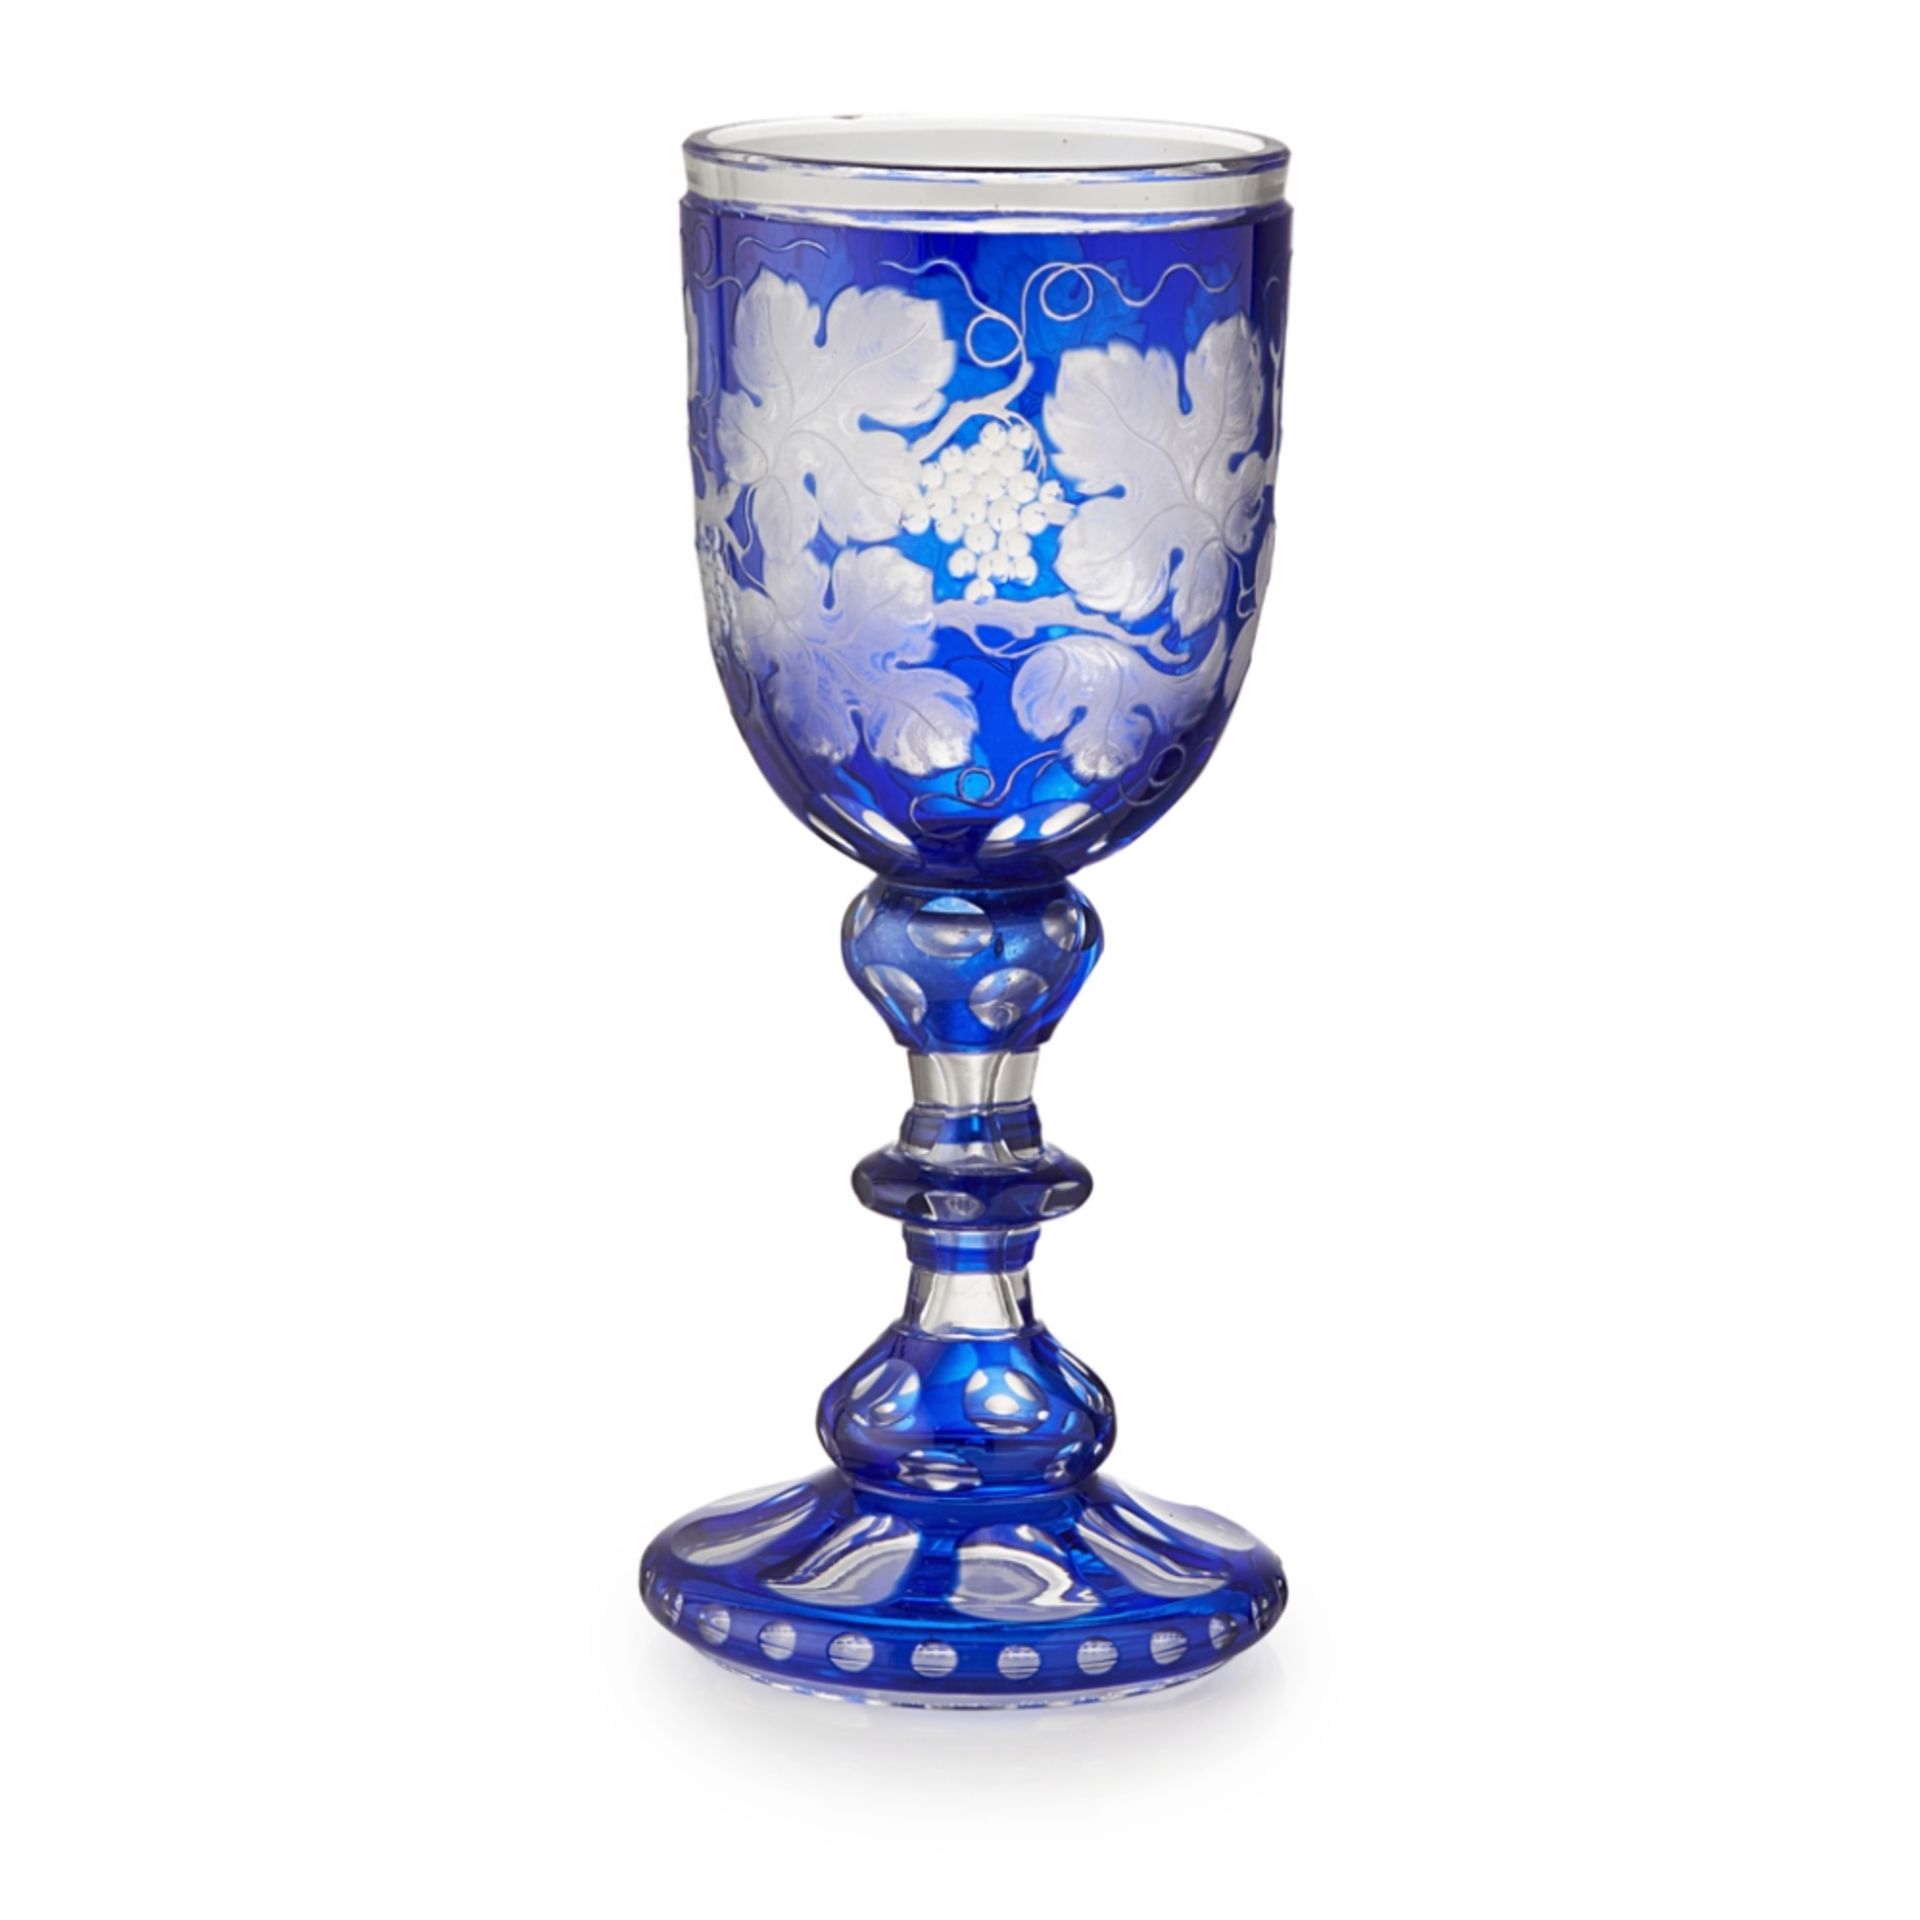 BOHEMIAN BLUE STAINED ETCHED AND ENGRAVED GLASS WINE GOBLET19TH CENTURY the acid-etched and cut-bowl